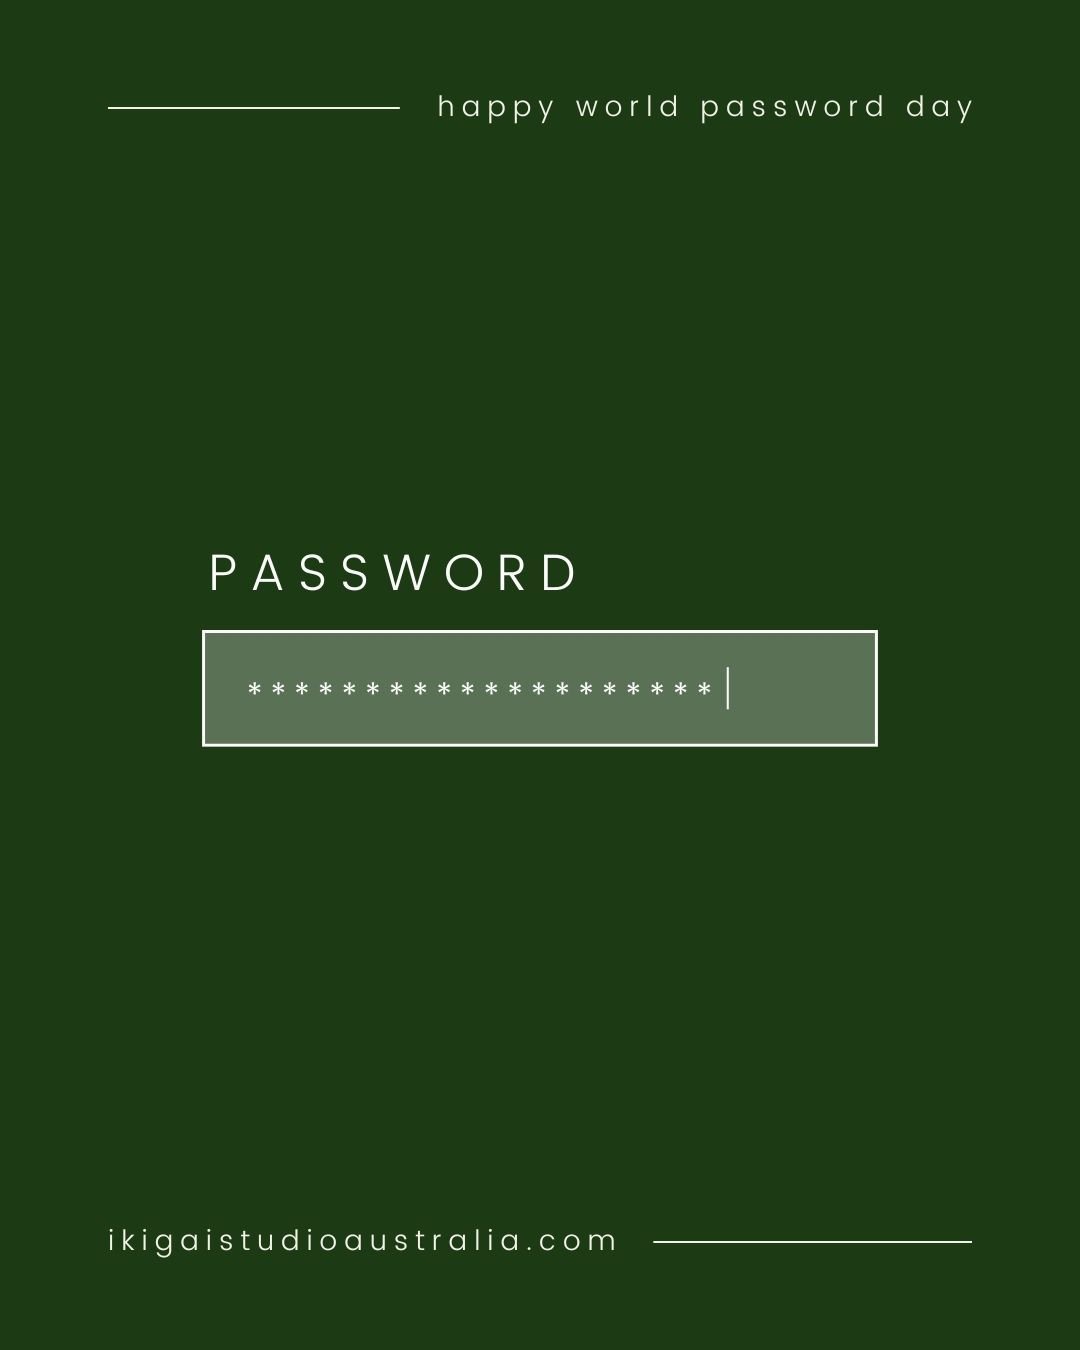 Just a reminder to set secure passwords xxx

***

Happy world password day! 

Did you know a 16 character password with numbers, lowercase letters, uppercase letters and symbols would take around 1 trillion years for AI to crack? 🧐

Wait for it... 
